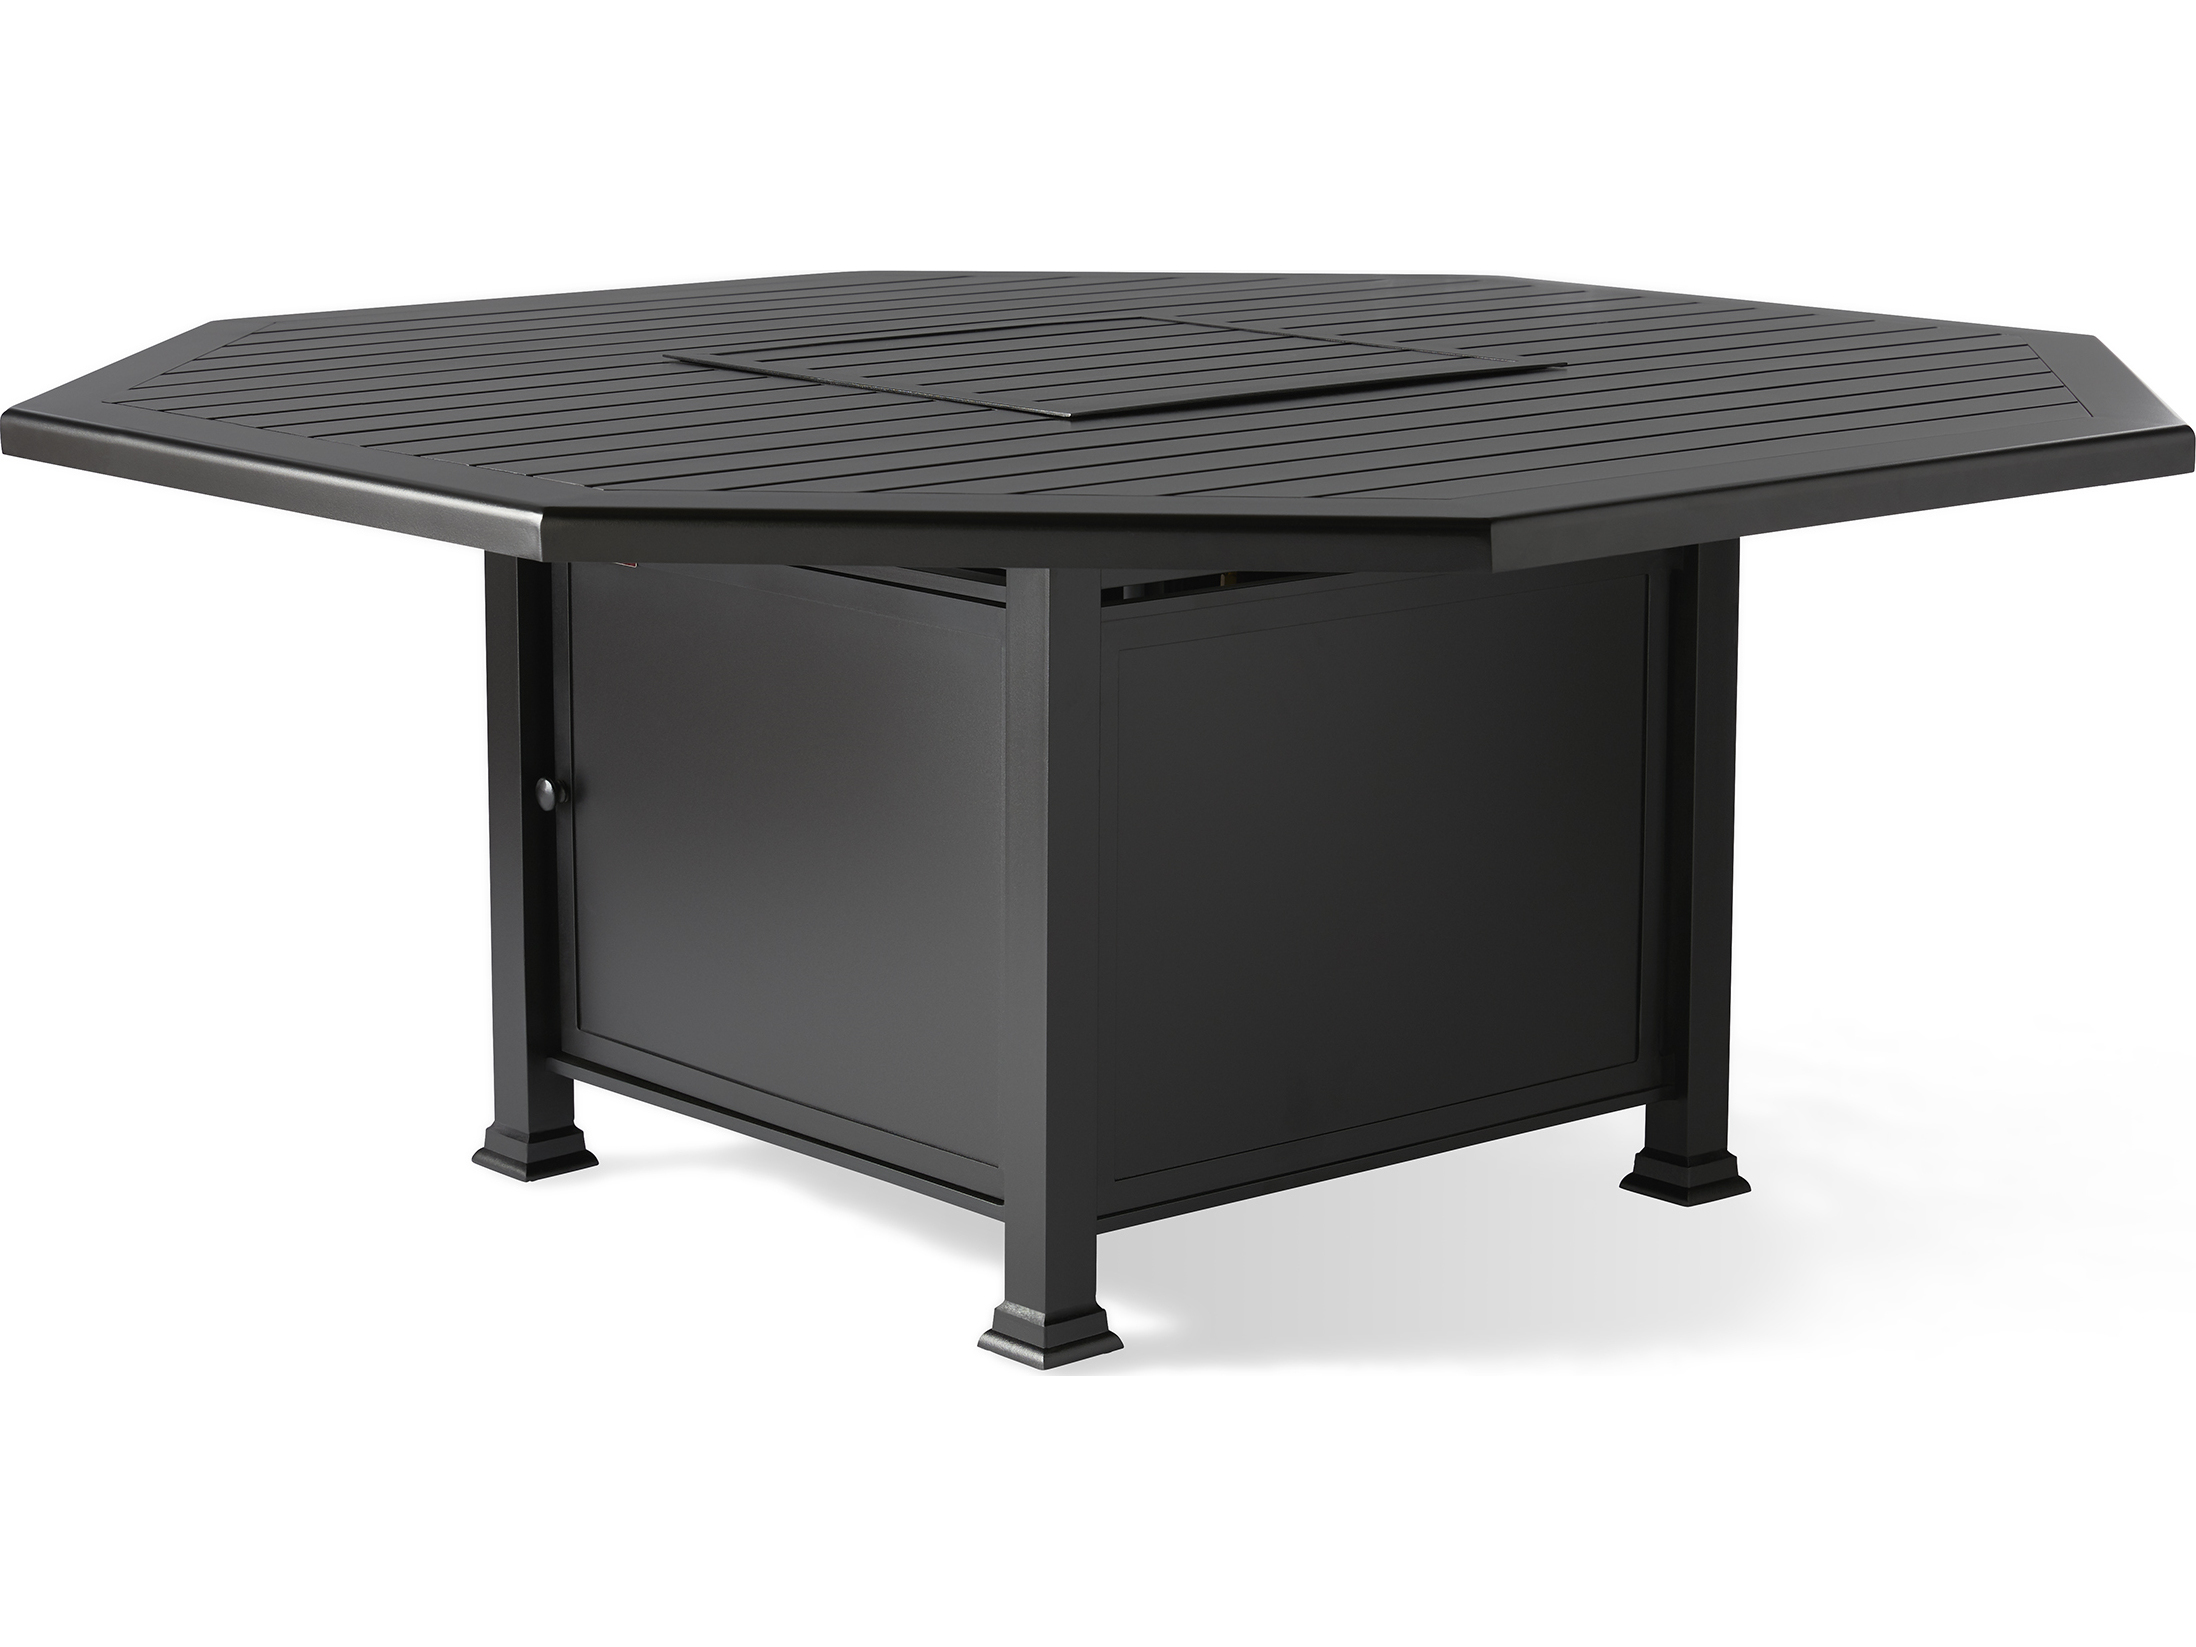 Mallin Pasa Robles Firepit Tables F Top, Octagon Fire Pit